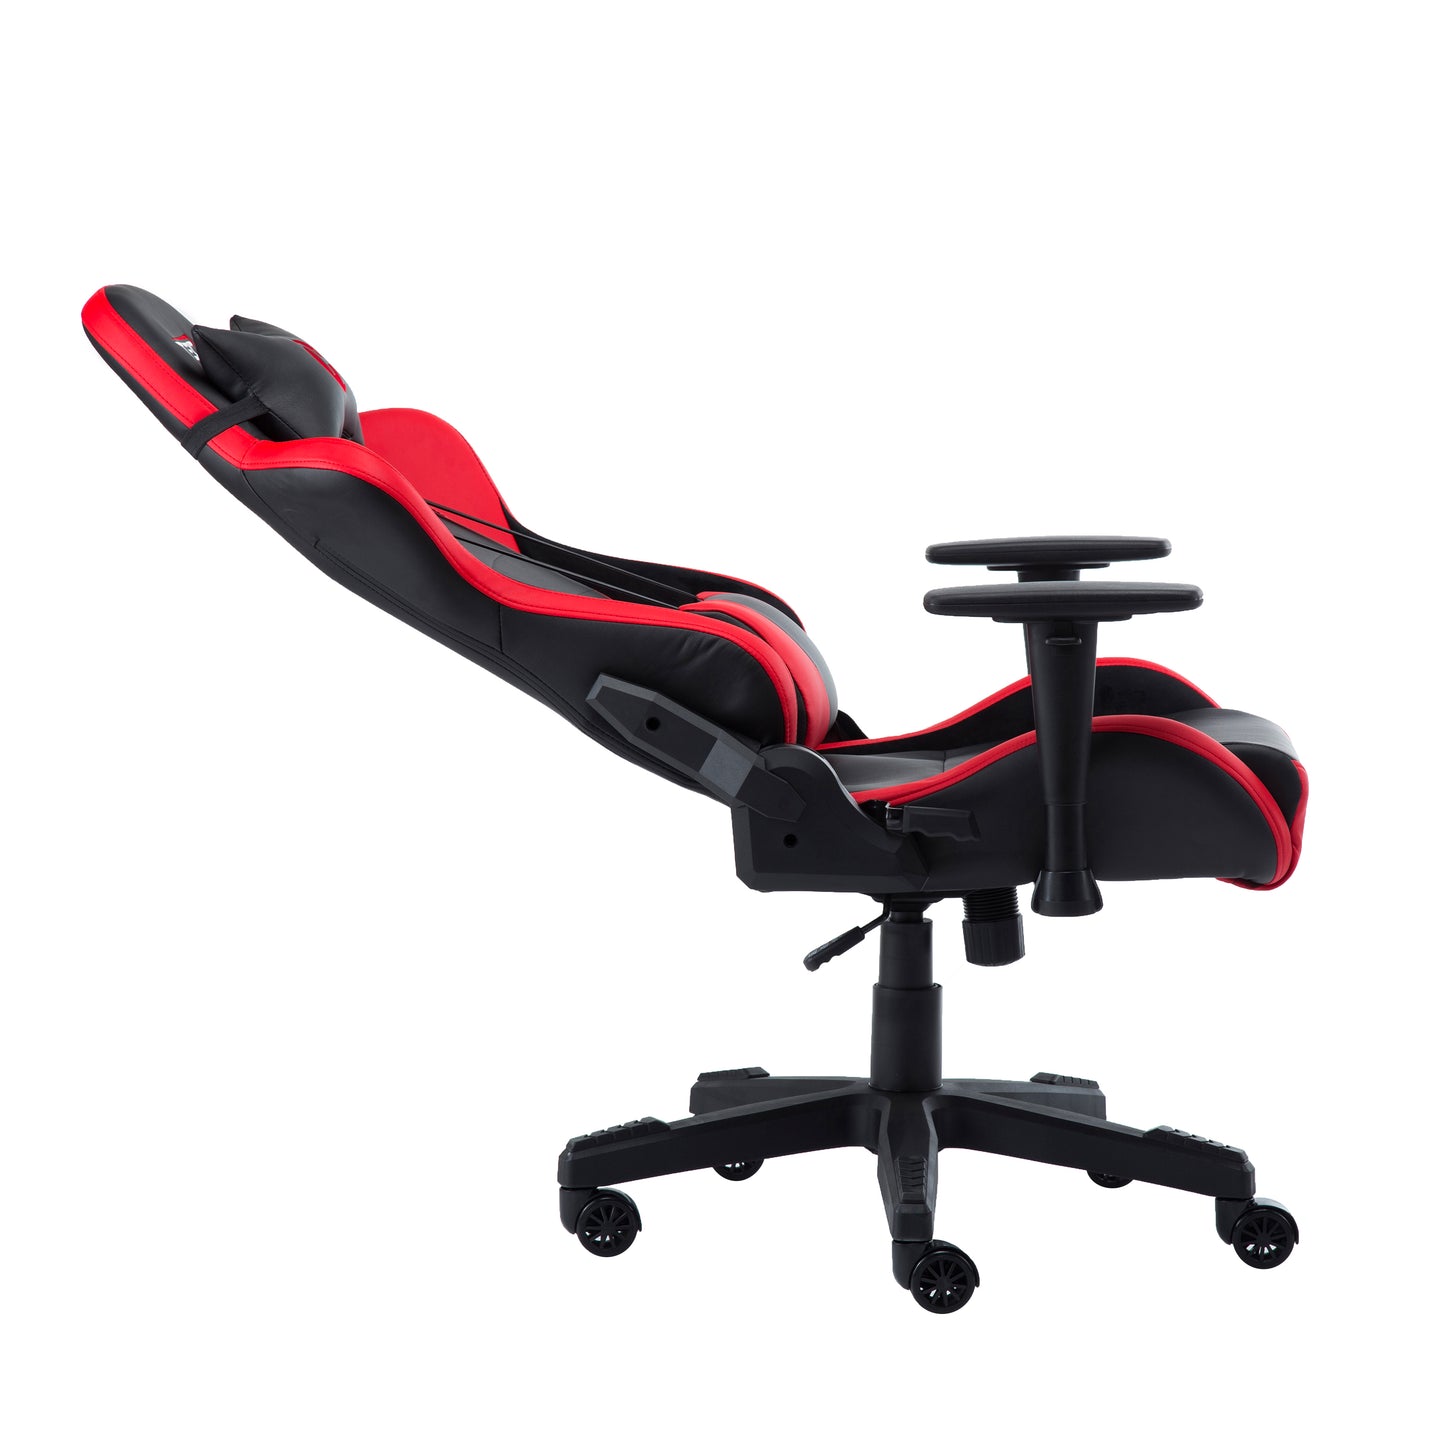 TS-90 Office-PC Gaming Chair, Red